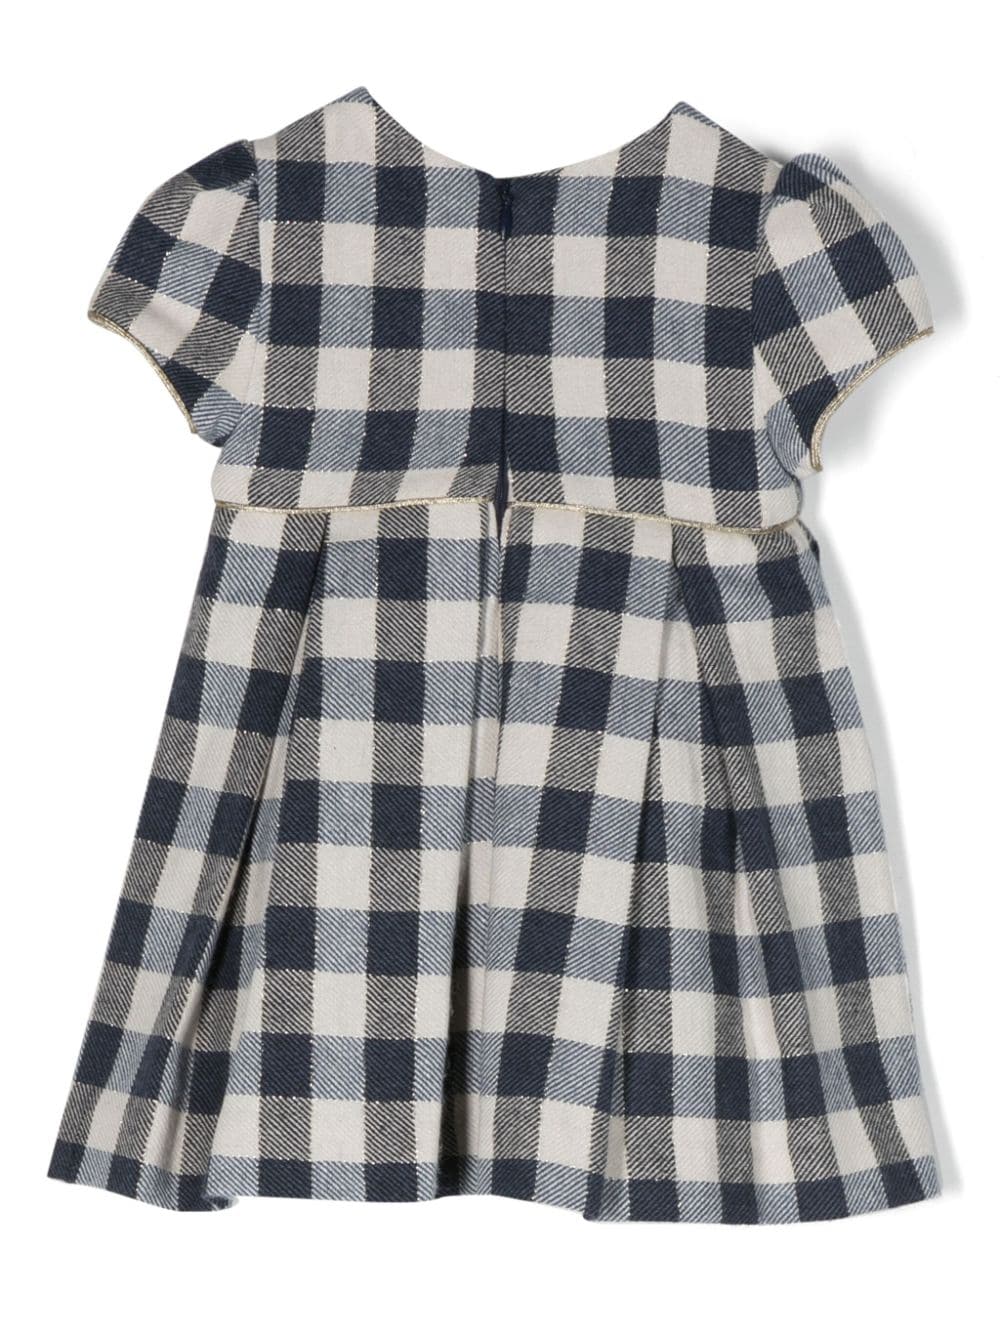 White and blue dress for baby girls